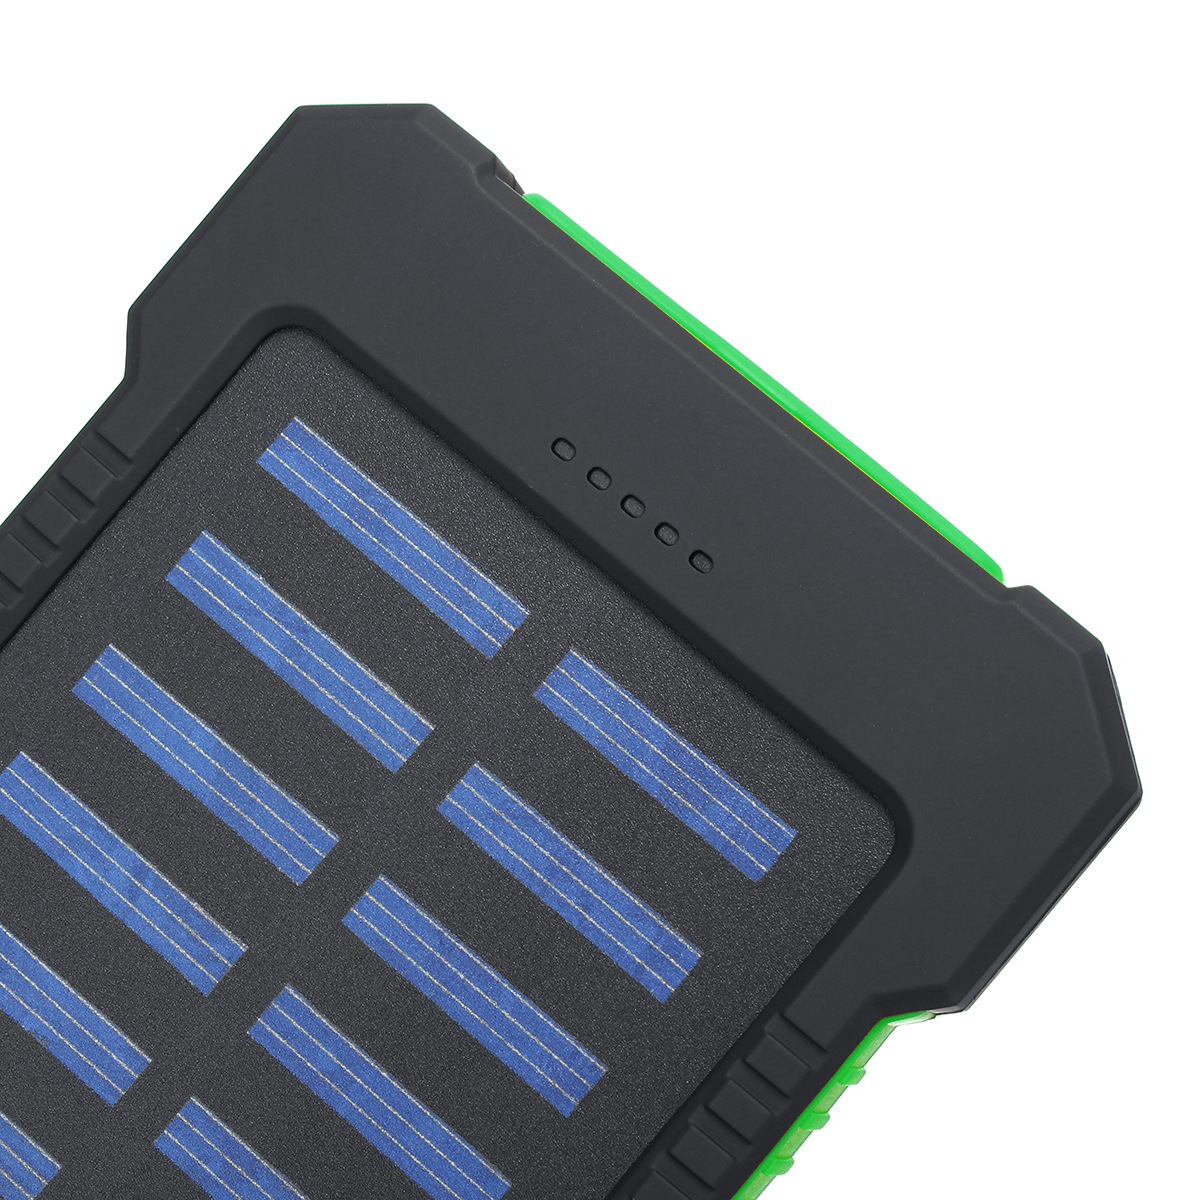 4000mah Intelligent Solar Panel Charger Solar Power Bank LED 2 USB Battery Charger Waterproof